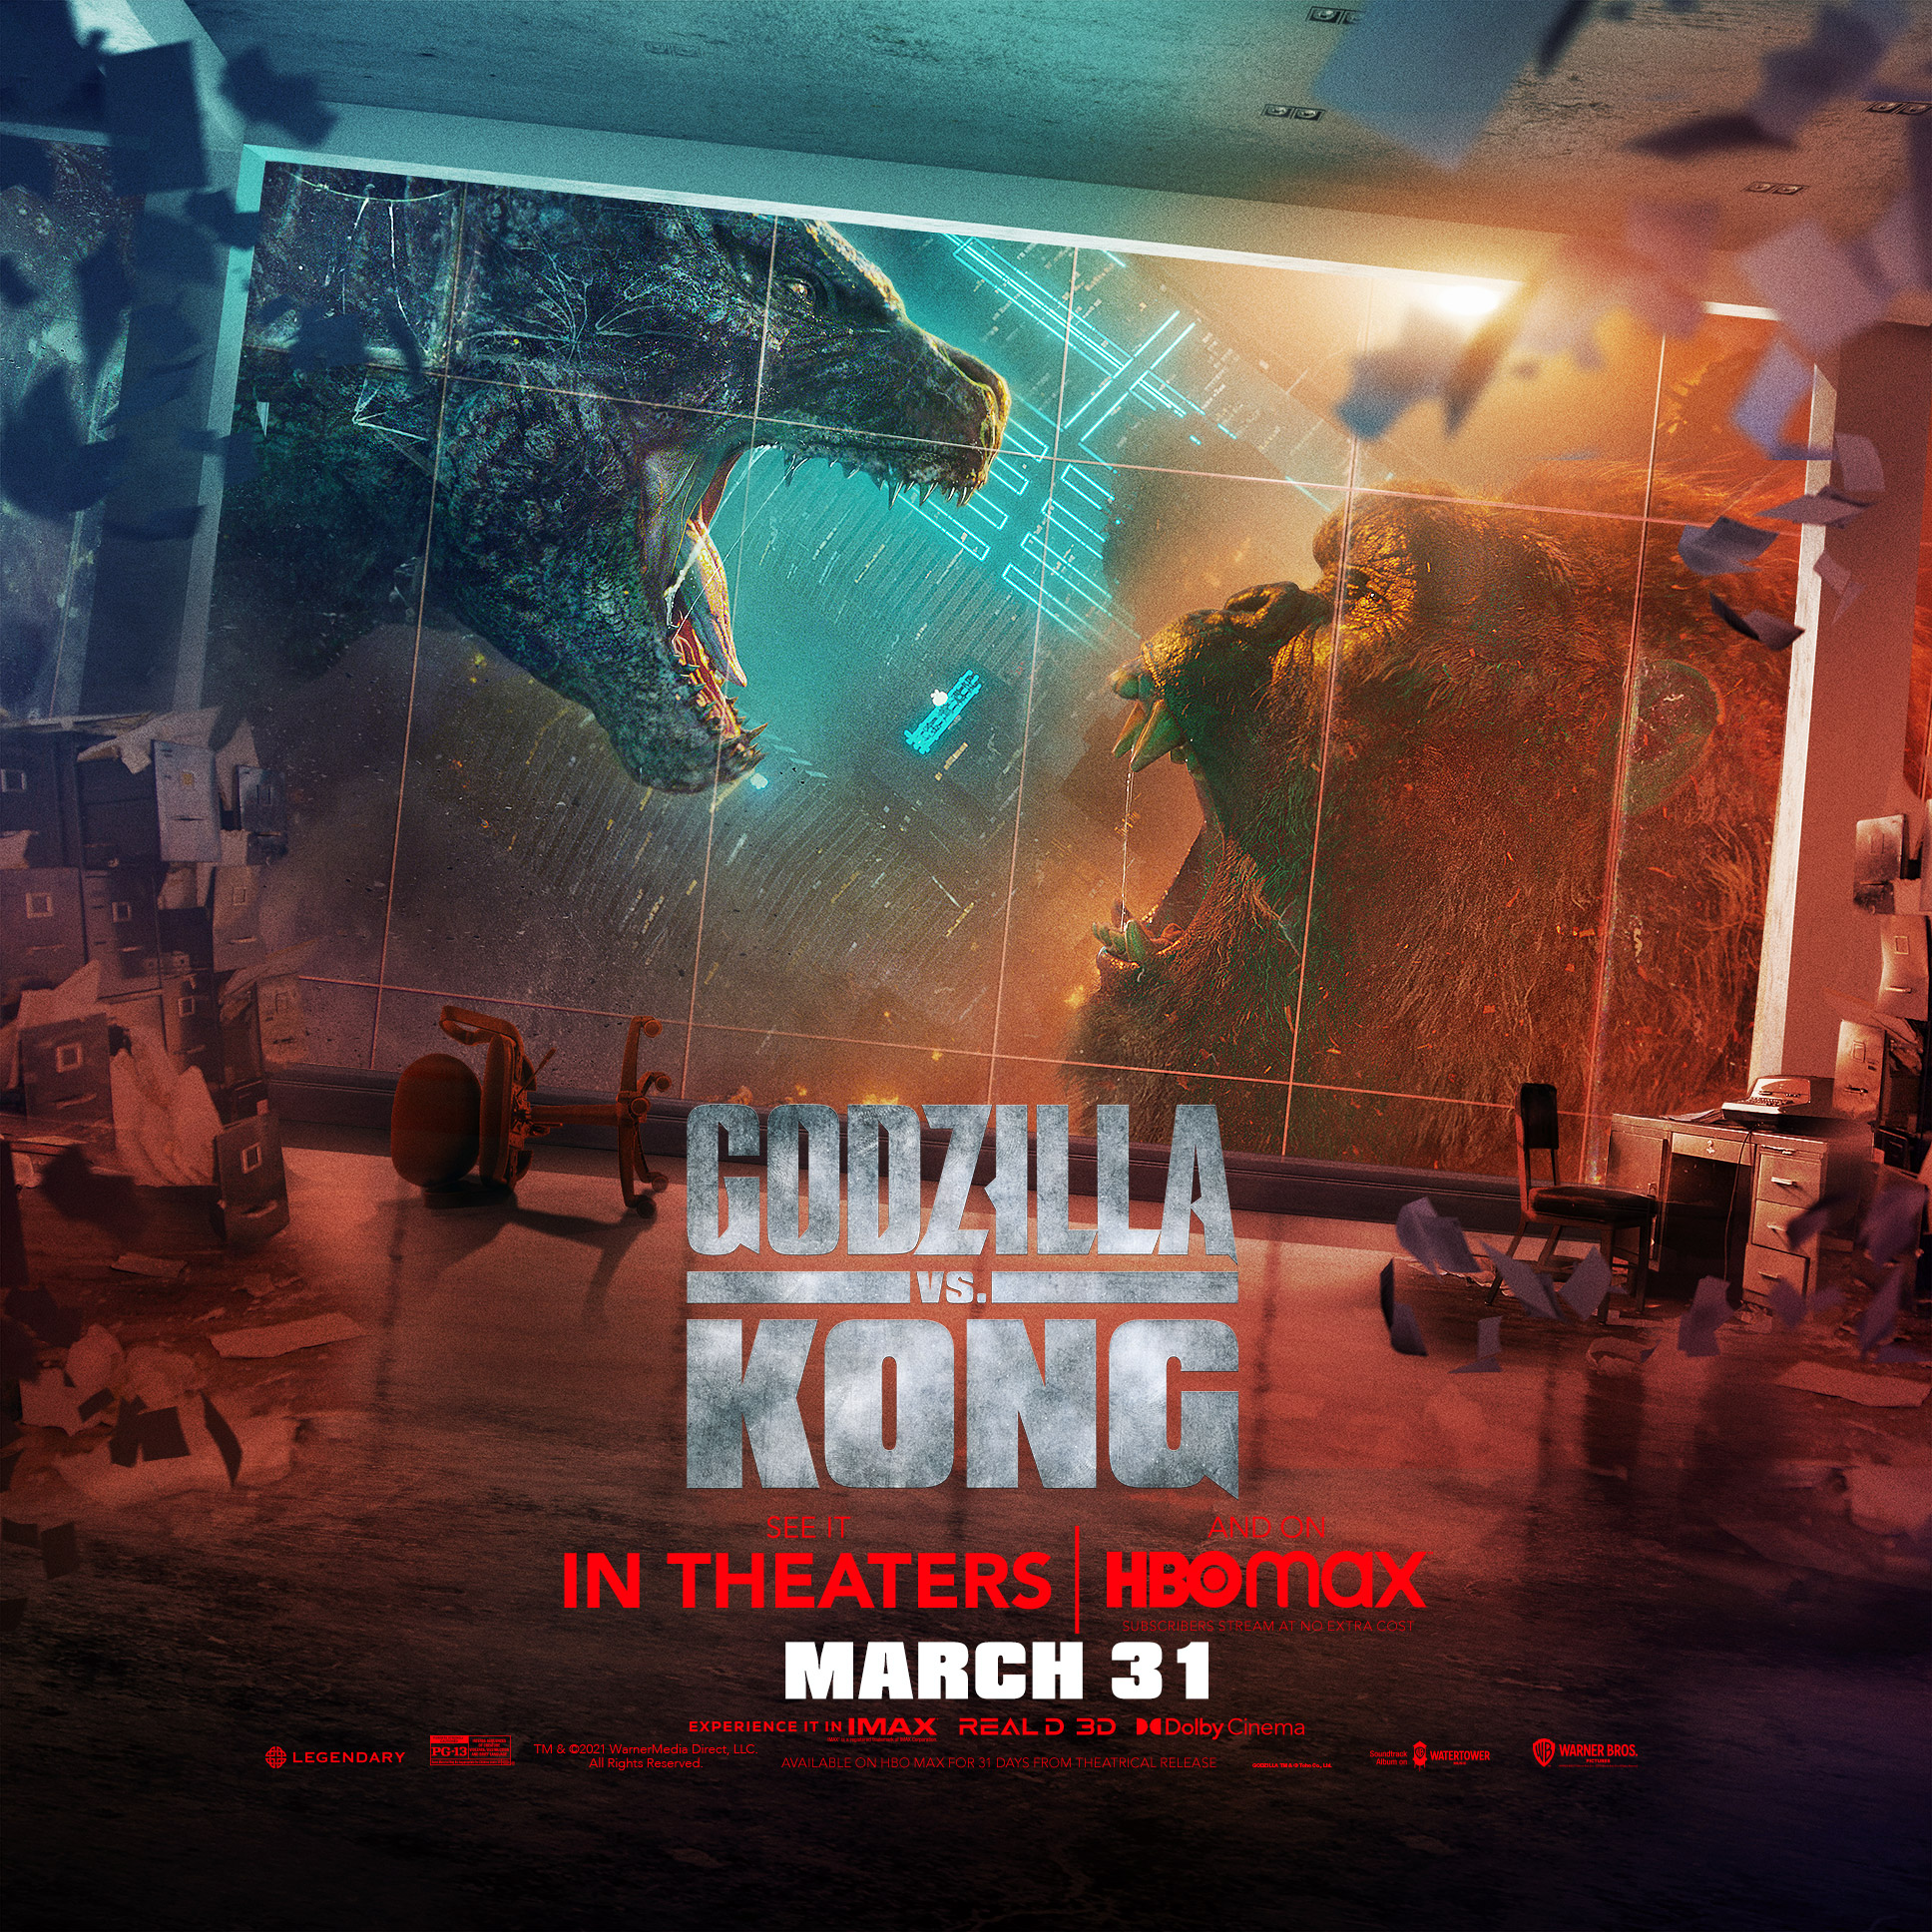 Godzilla x Kong on X: It's a fight to the finish, and no one's bowing  down. 👊 #GodzillaVsKong is now playing in theaters and streaming  exclusively on @HBOMax*. Get tickets:  *Available